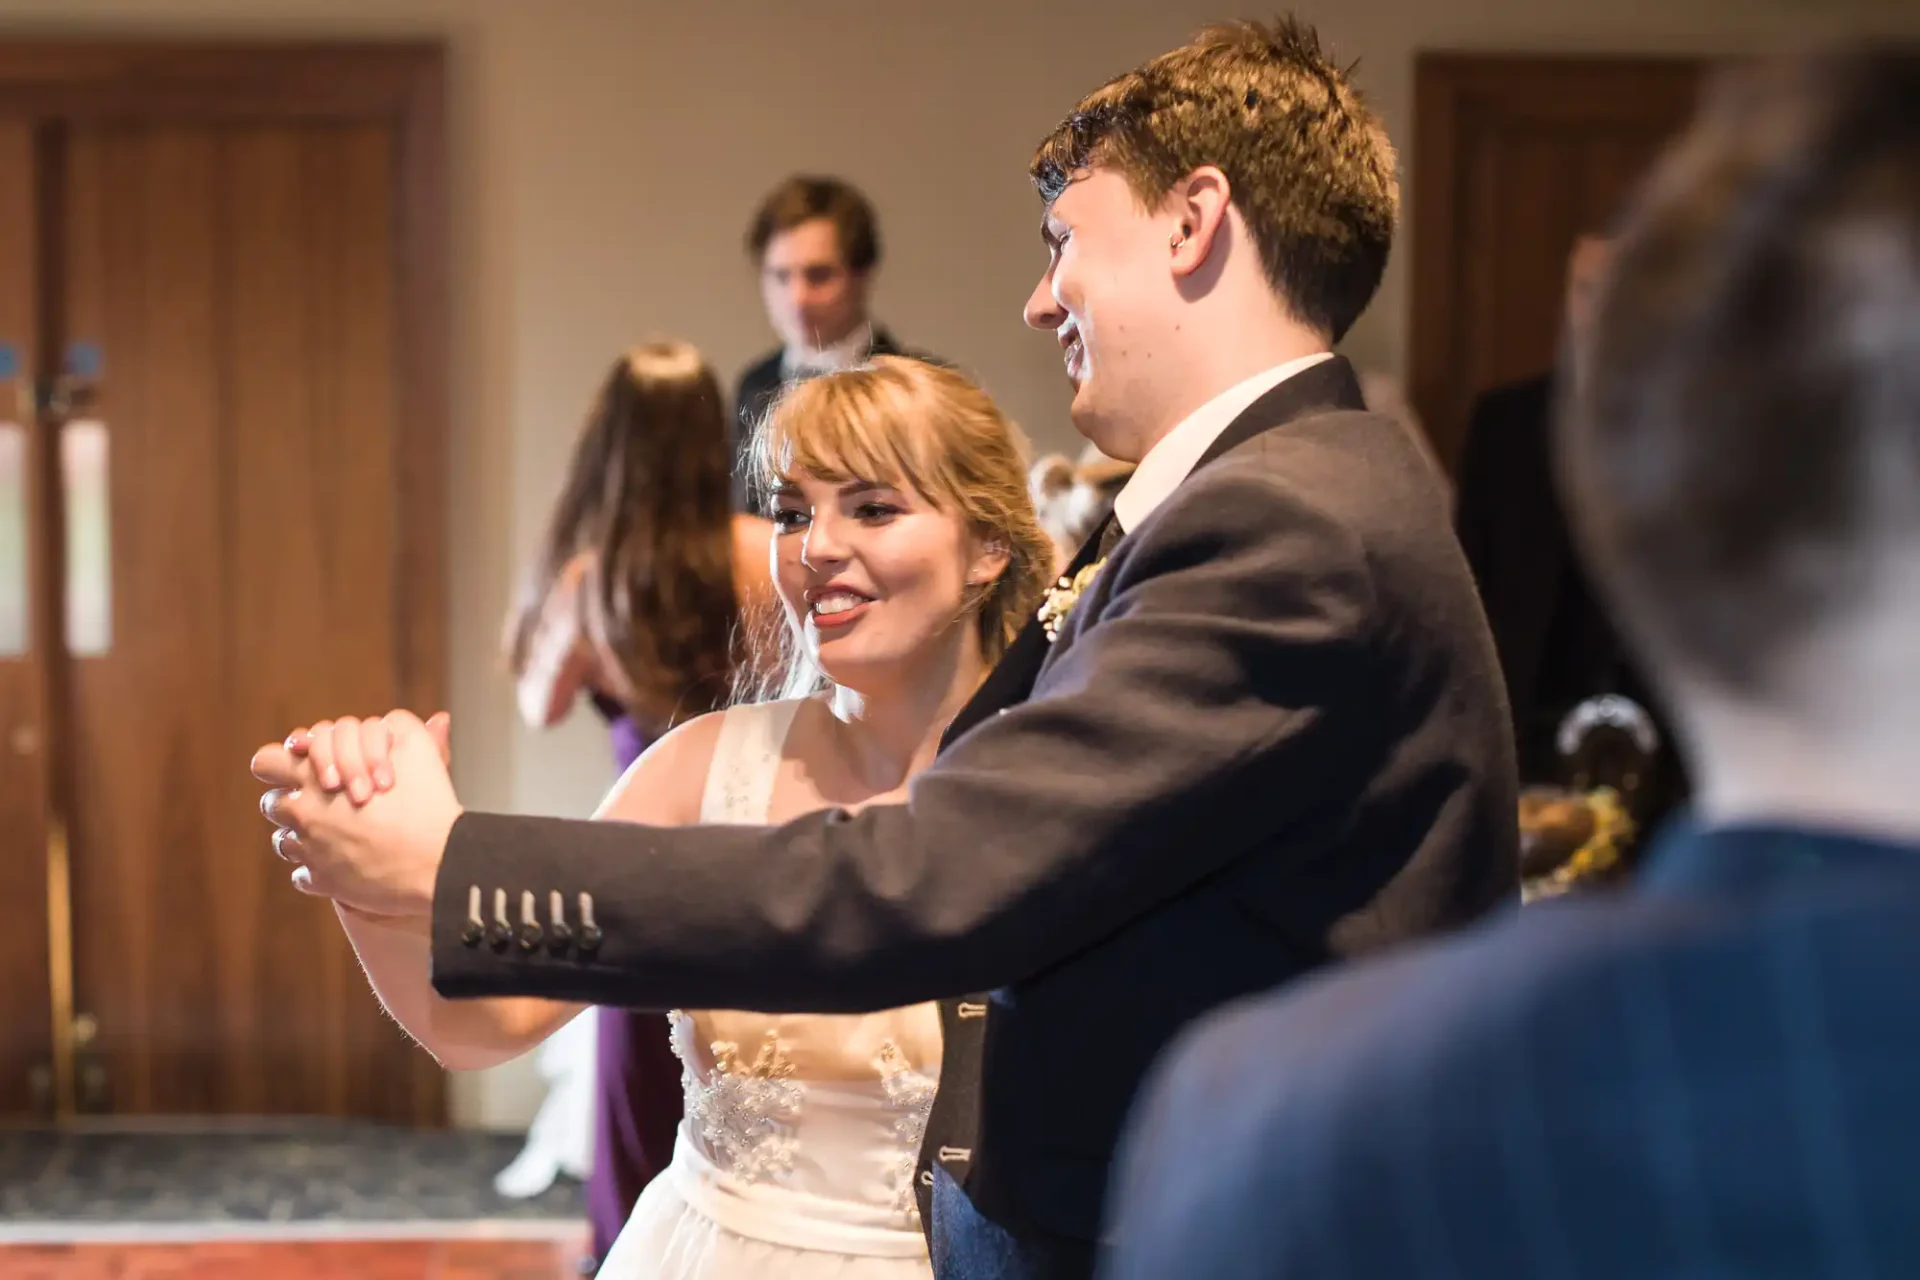 A young couple dancing joyfully at a wedding reception, brightly smiling as they hold hands, surrounded by guests in soft focus.